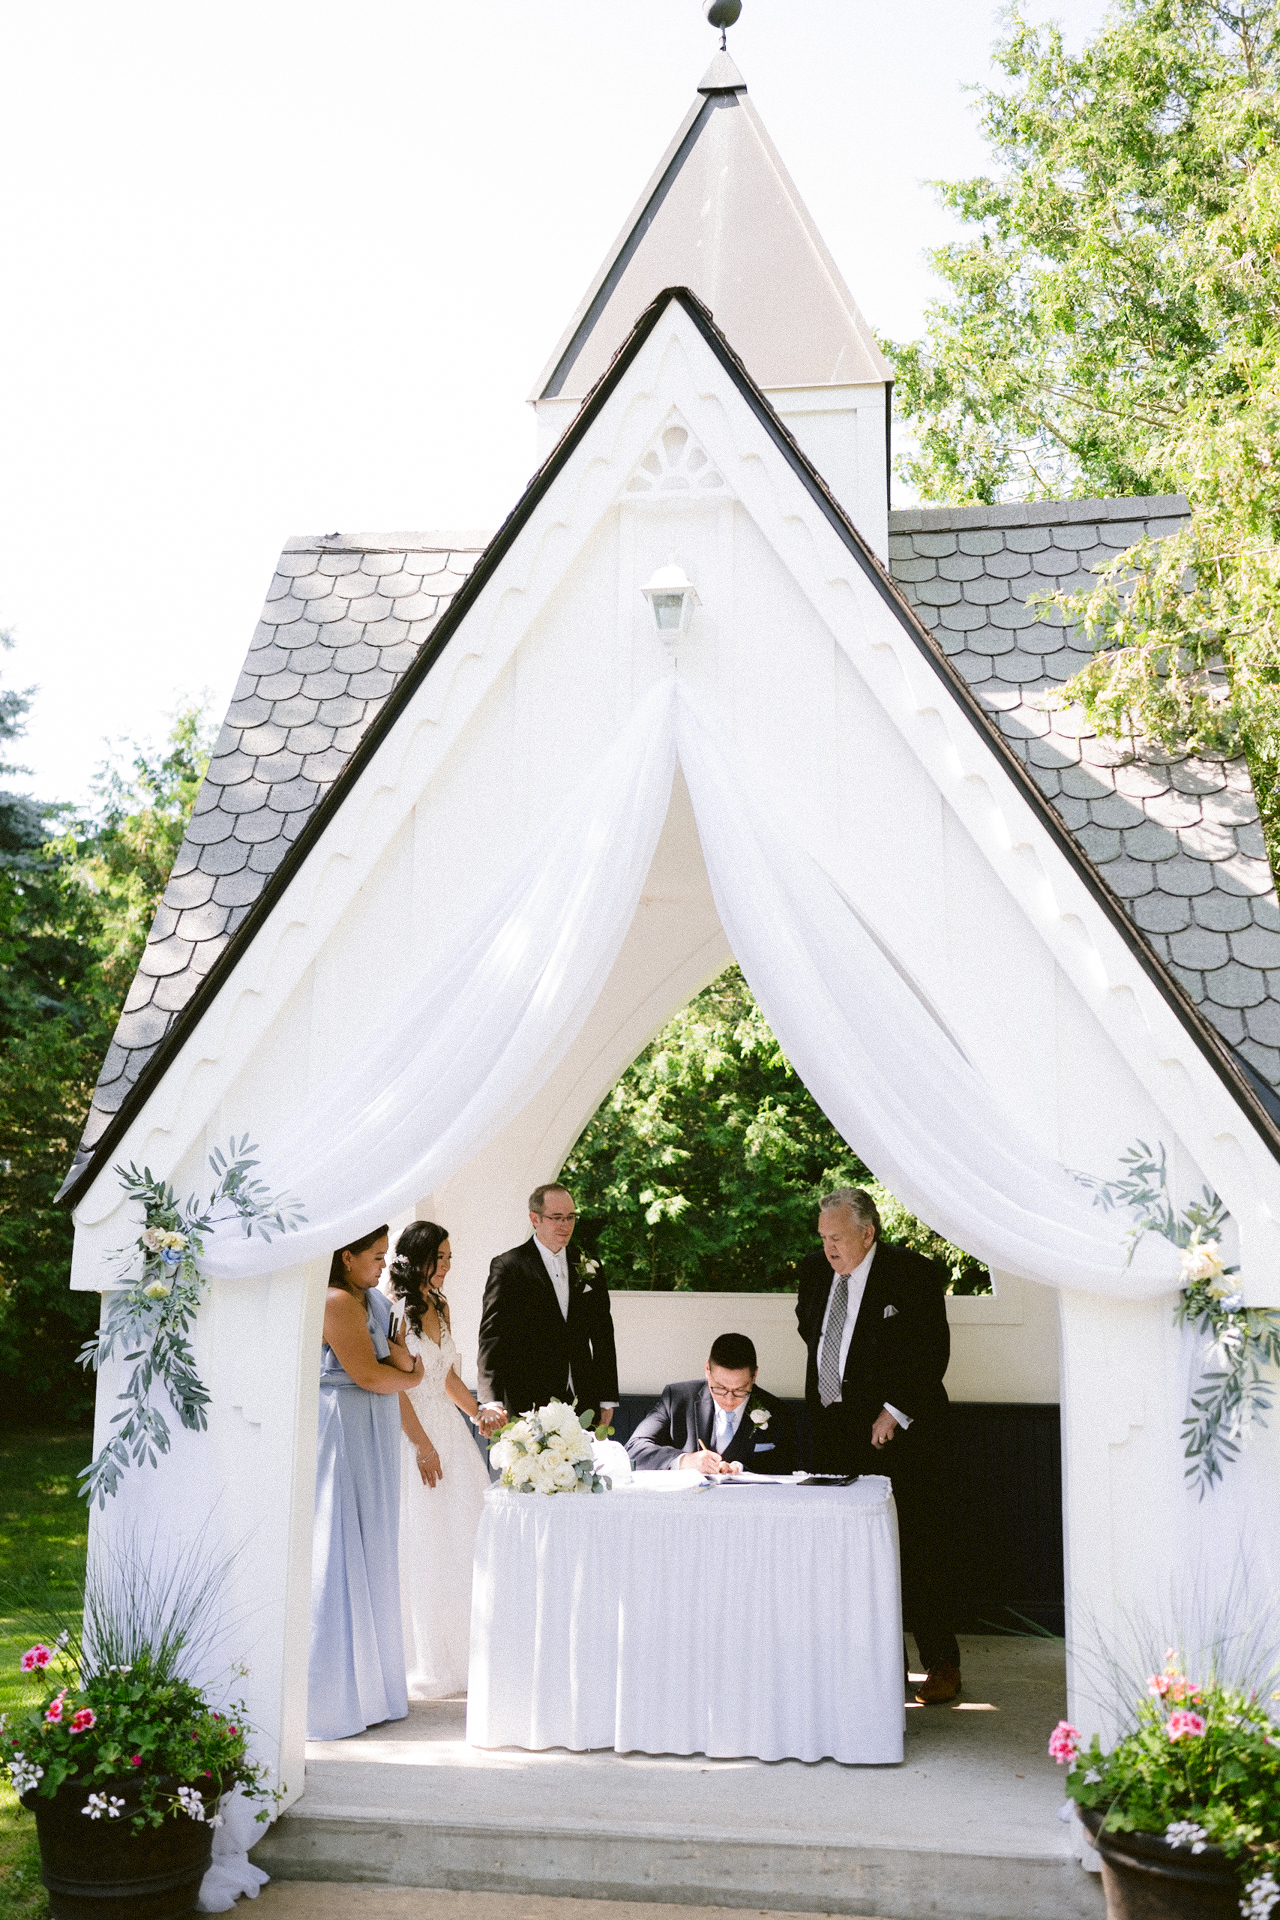 A wedding ceremony taking place under a white gazebo with the officiant and a couple at the altar.